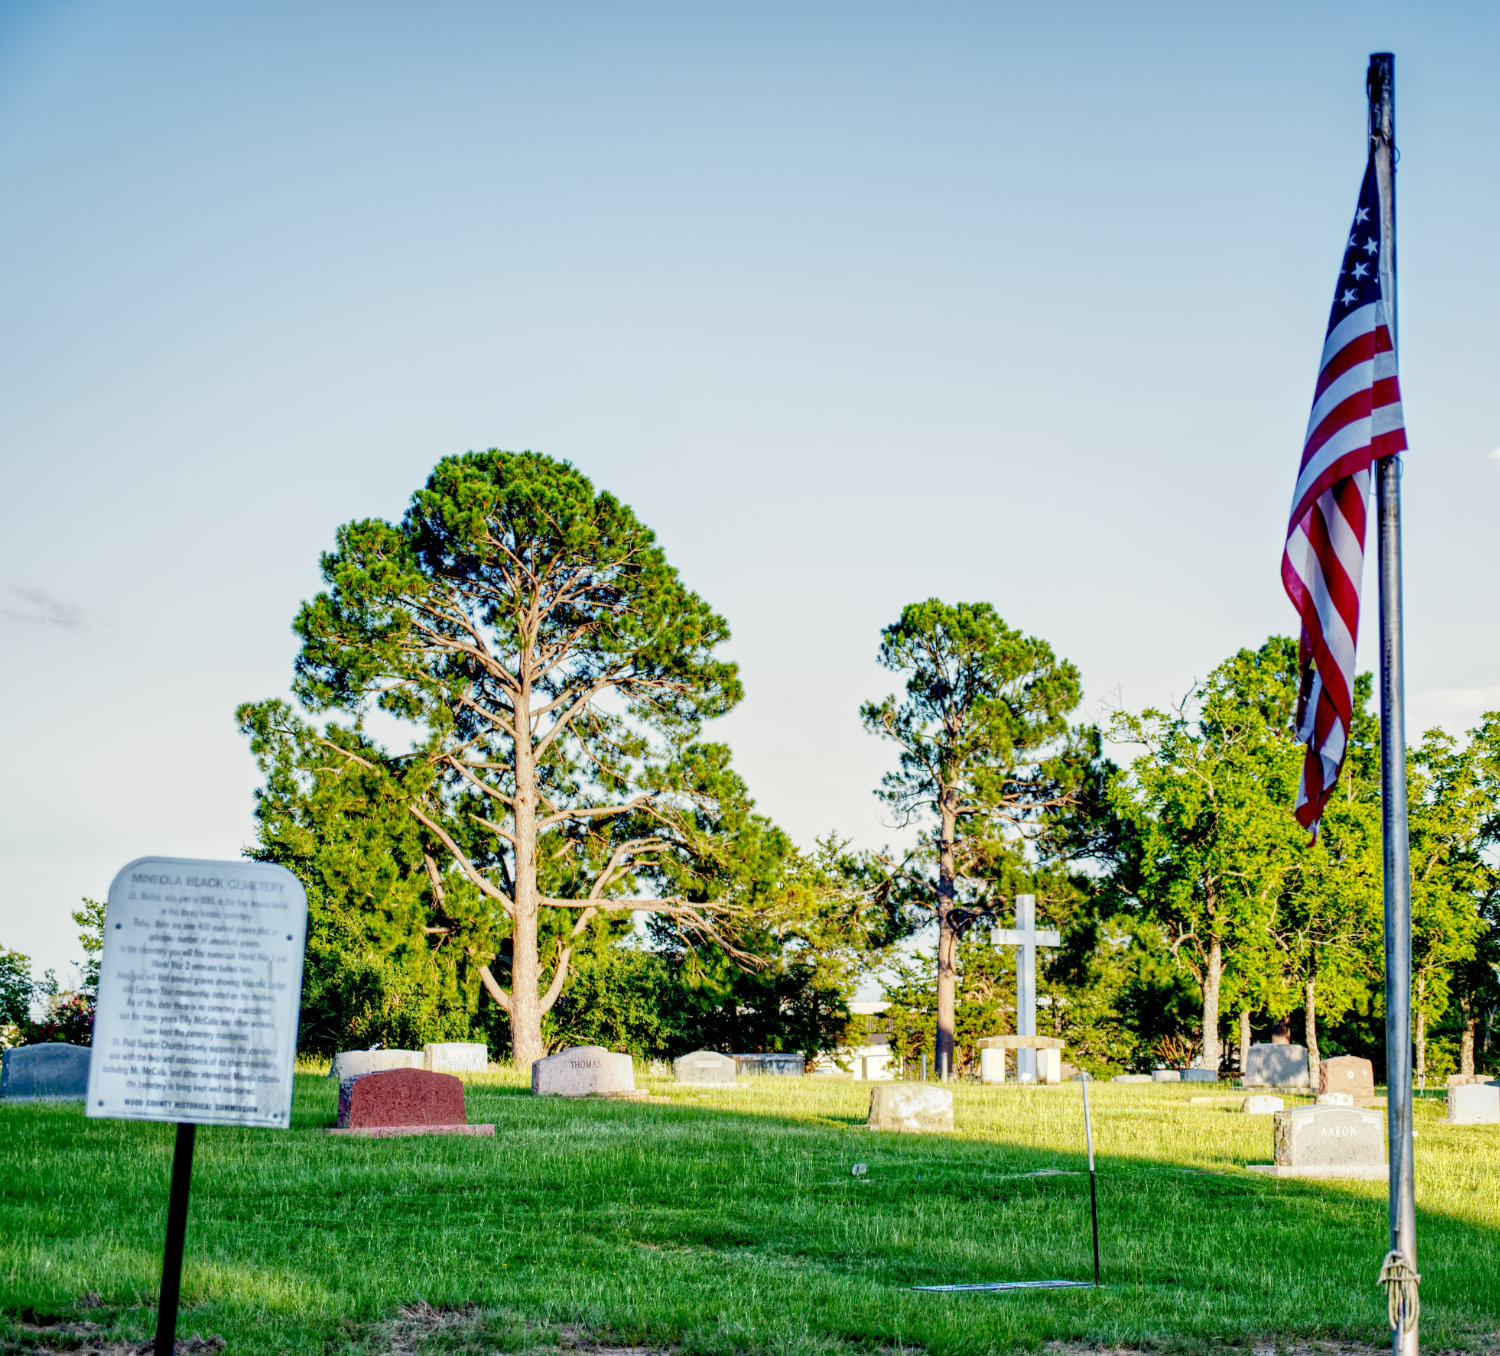 A historical marker and American flag stand reamain between Cedar Memorial Gardens and the Black cemetery in Mineola, with a cross in the background on the other side. The fence is no longer present.